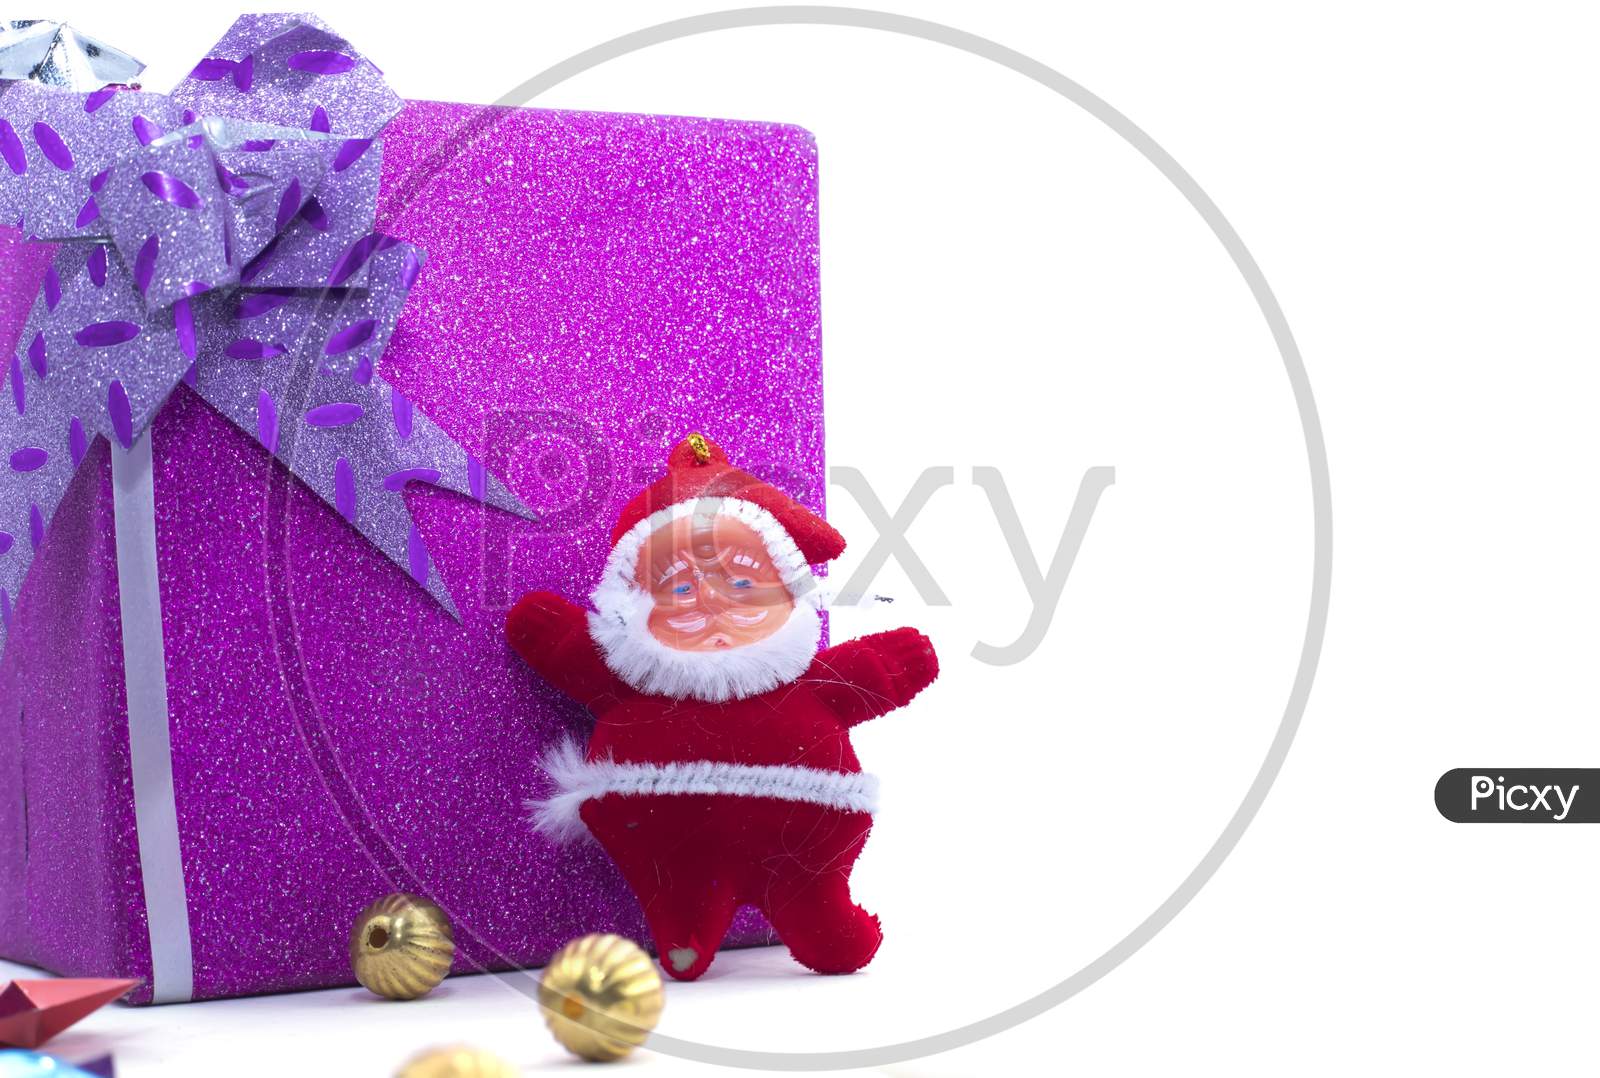 The Statue Of Santa Claus With The Large Gift Box Is Isolated On A White Background